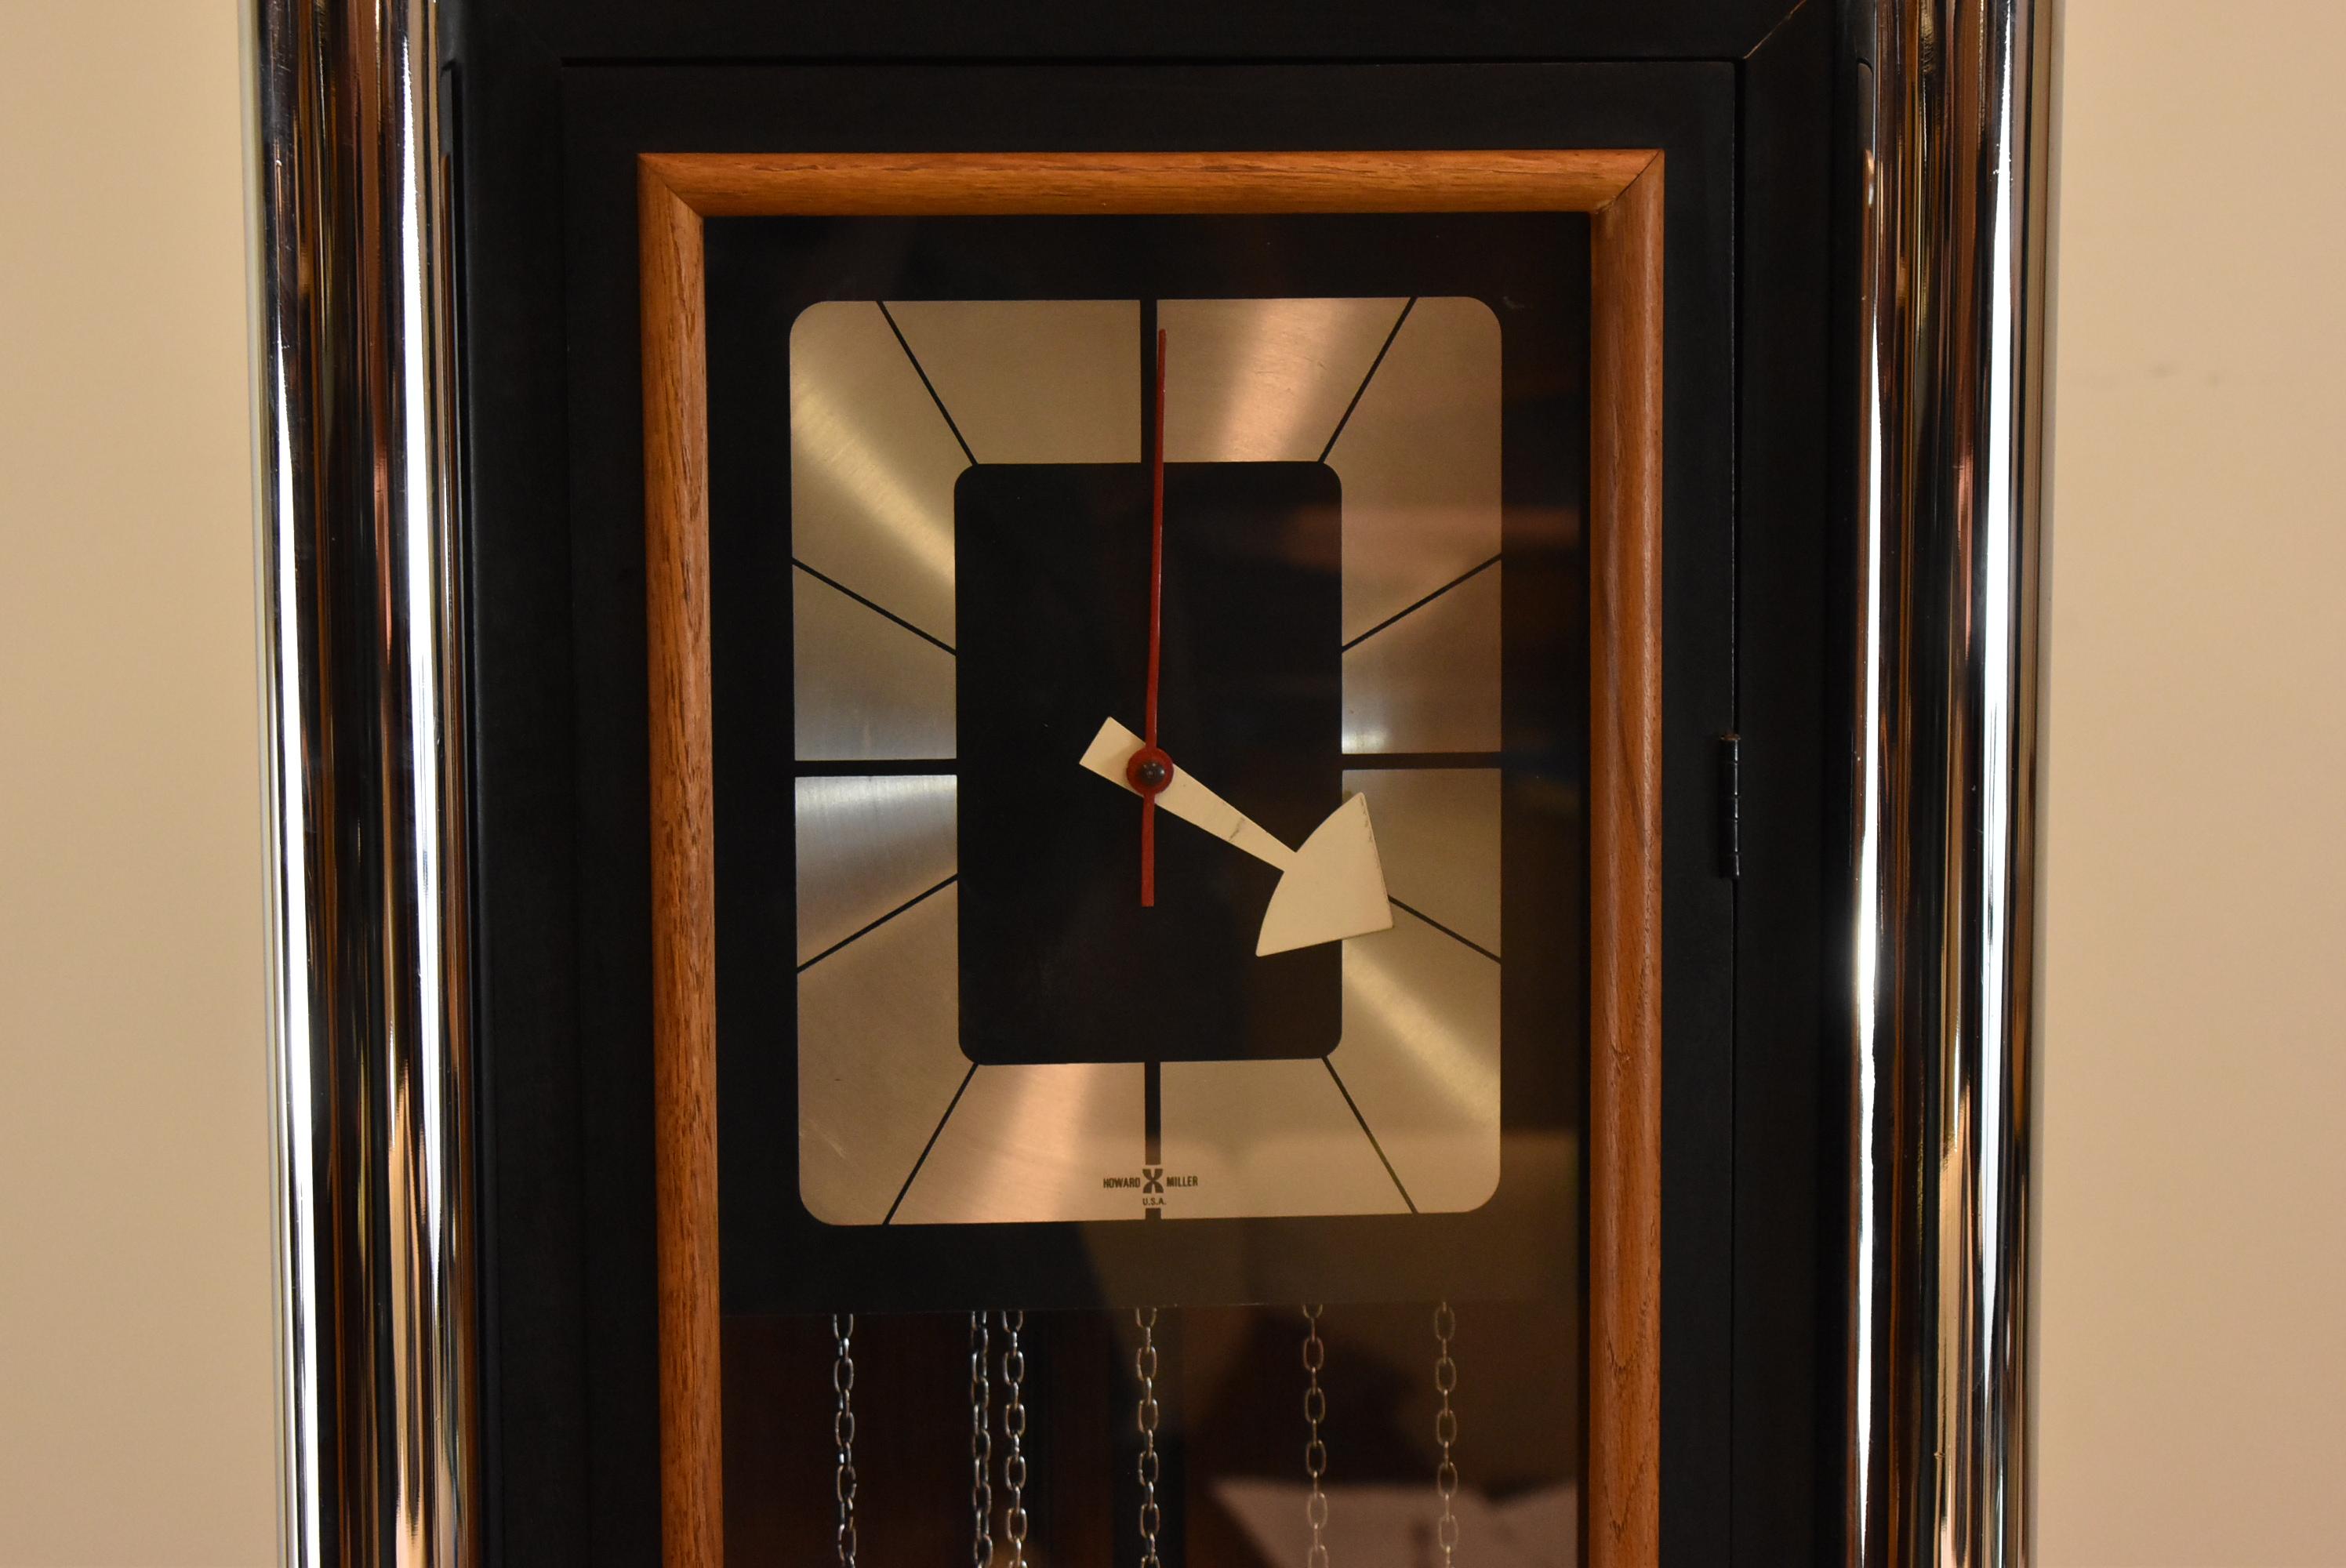 Mid-Century Modern Howard Miller floor clock. Black lacquer with half round chrome trim. Wood paneled front. Chimes need adjustment does not strike properly. Weighs have some dents. Dimensions: 10.5